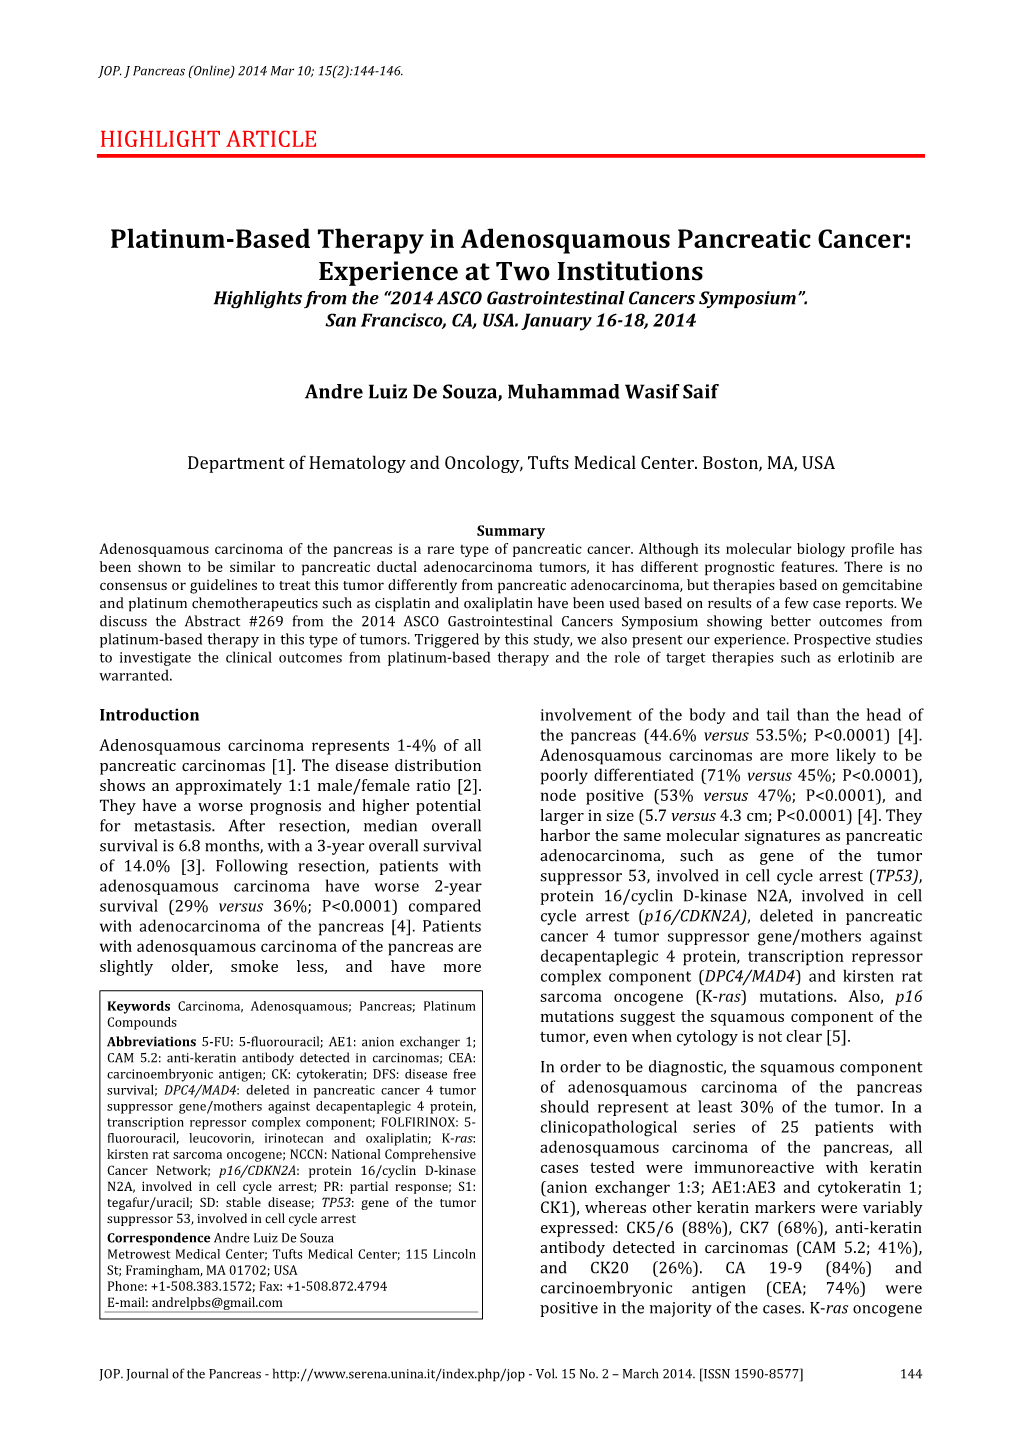 Platinum-Based Therapy in Adenosquamous Pancreatic Cancer: Experience at Two Institutions Highlights from the “2014 ASCO Gastrointestinal Cancers Symposium”